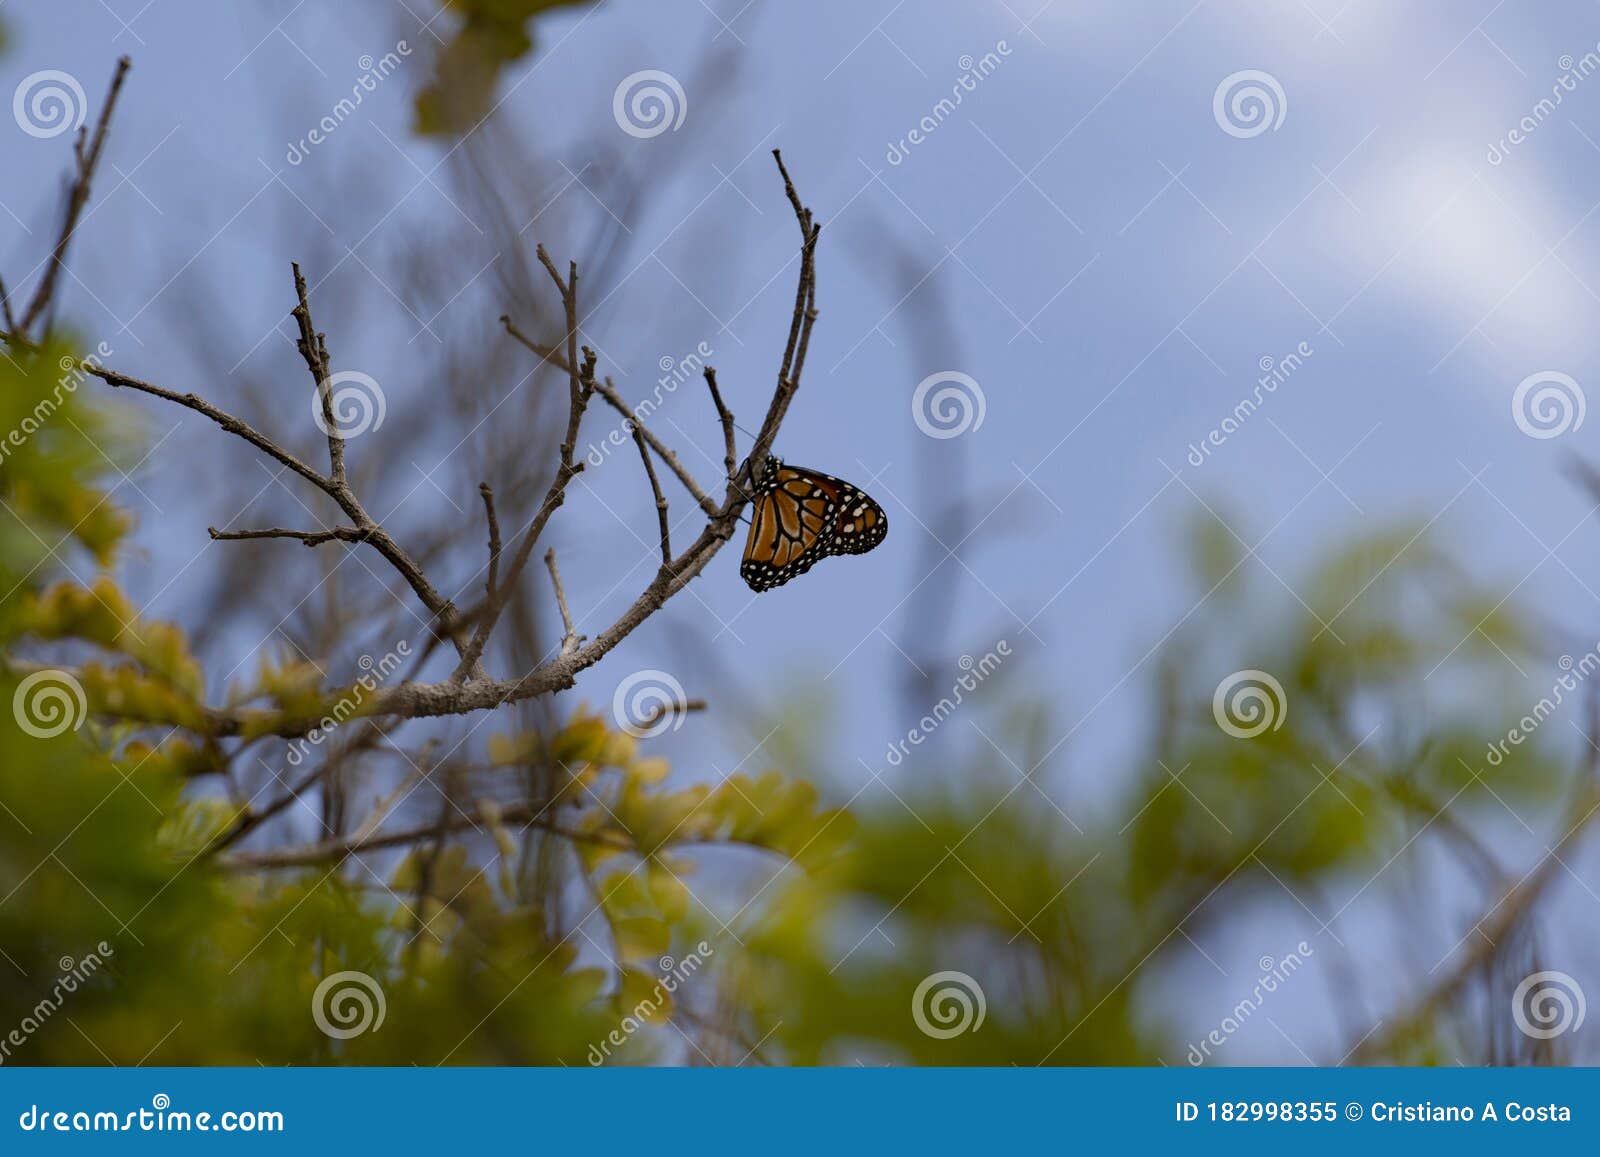 yellow butterfly on tree branch with blue sky